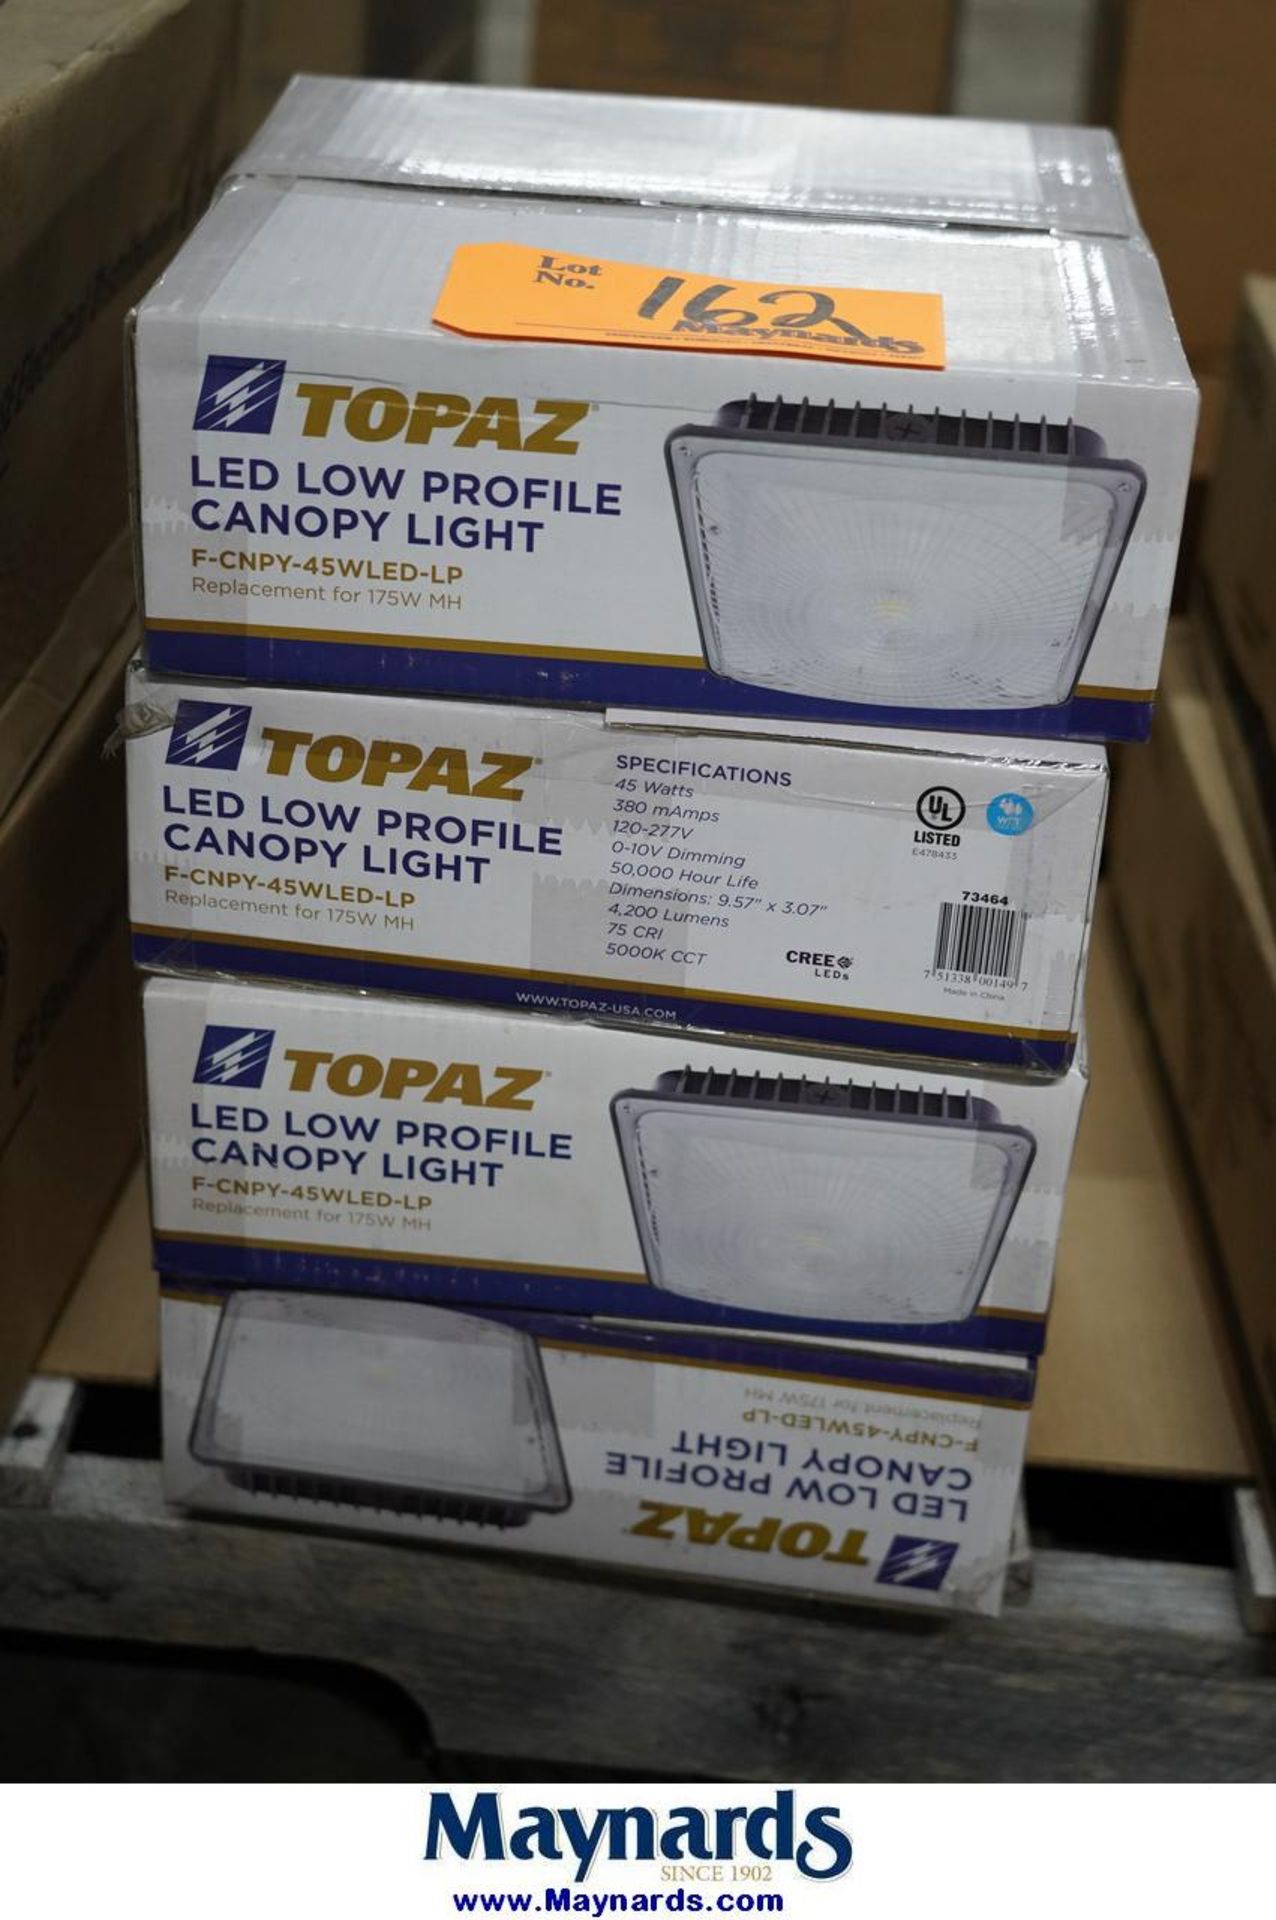 Topaz (4) Boxes of led low profile canopy light